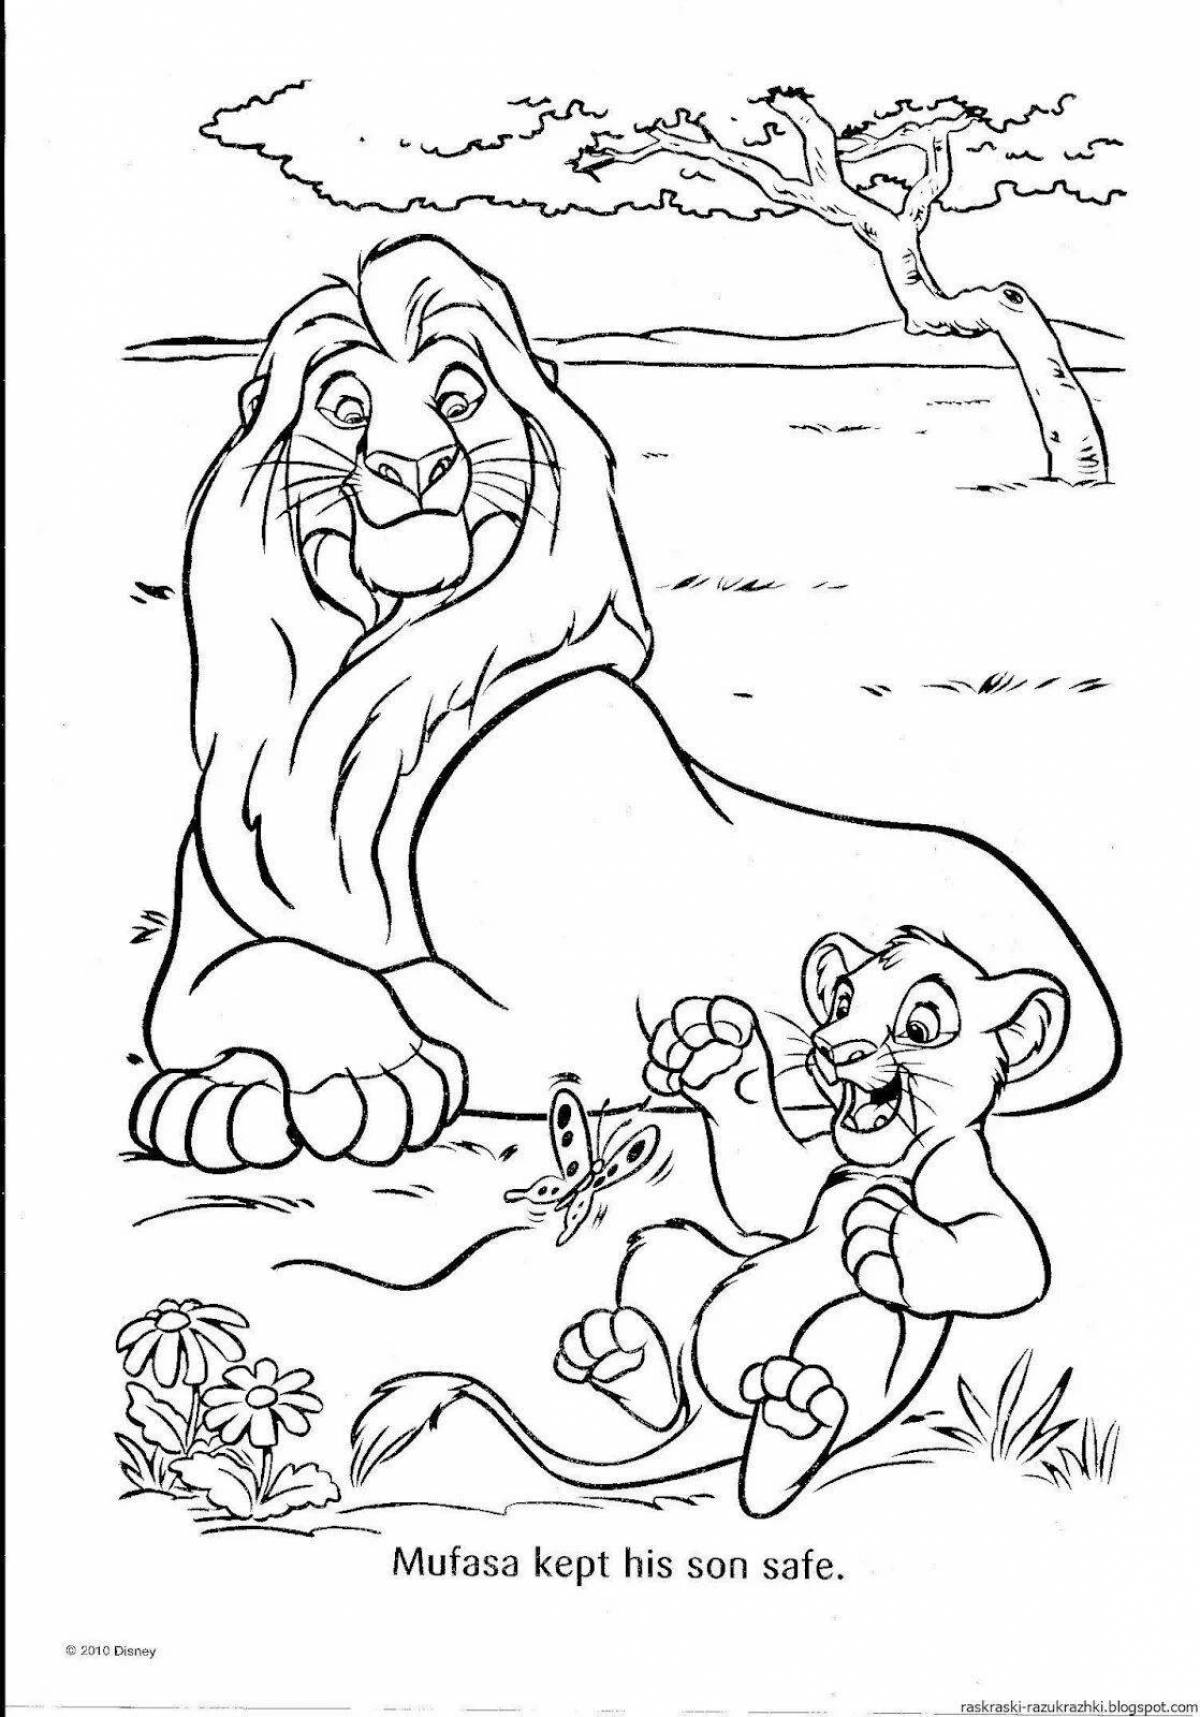 Colorful lion king coloring book for kids